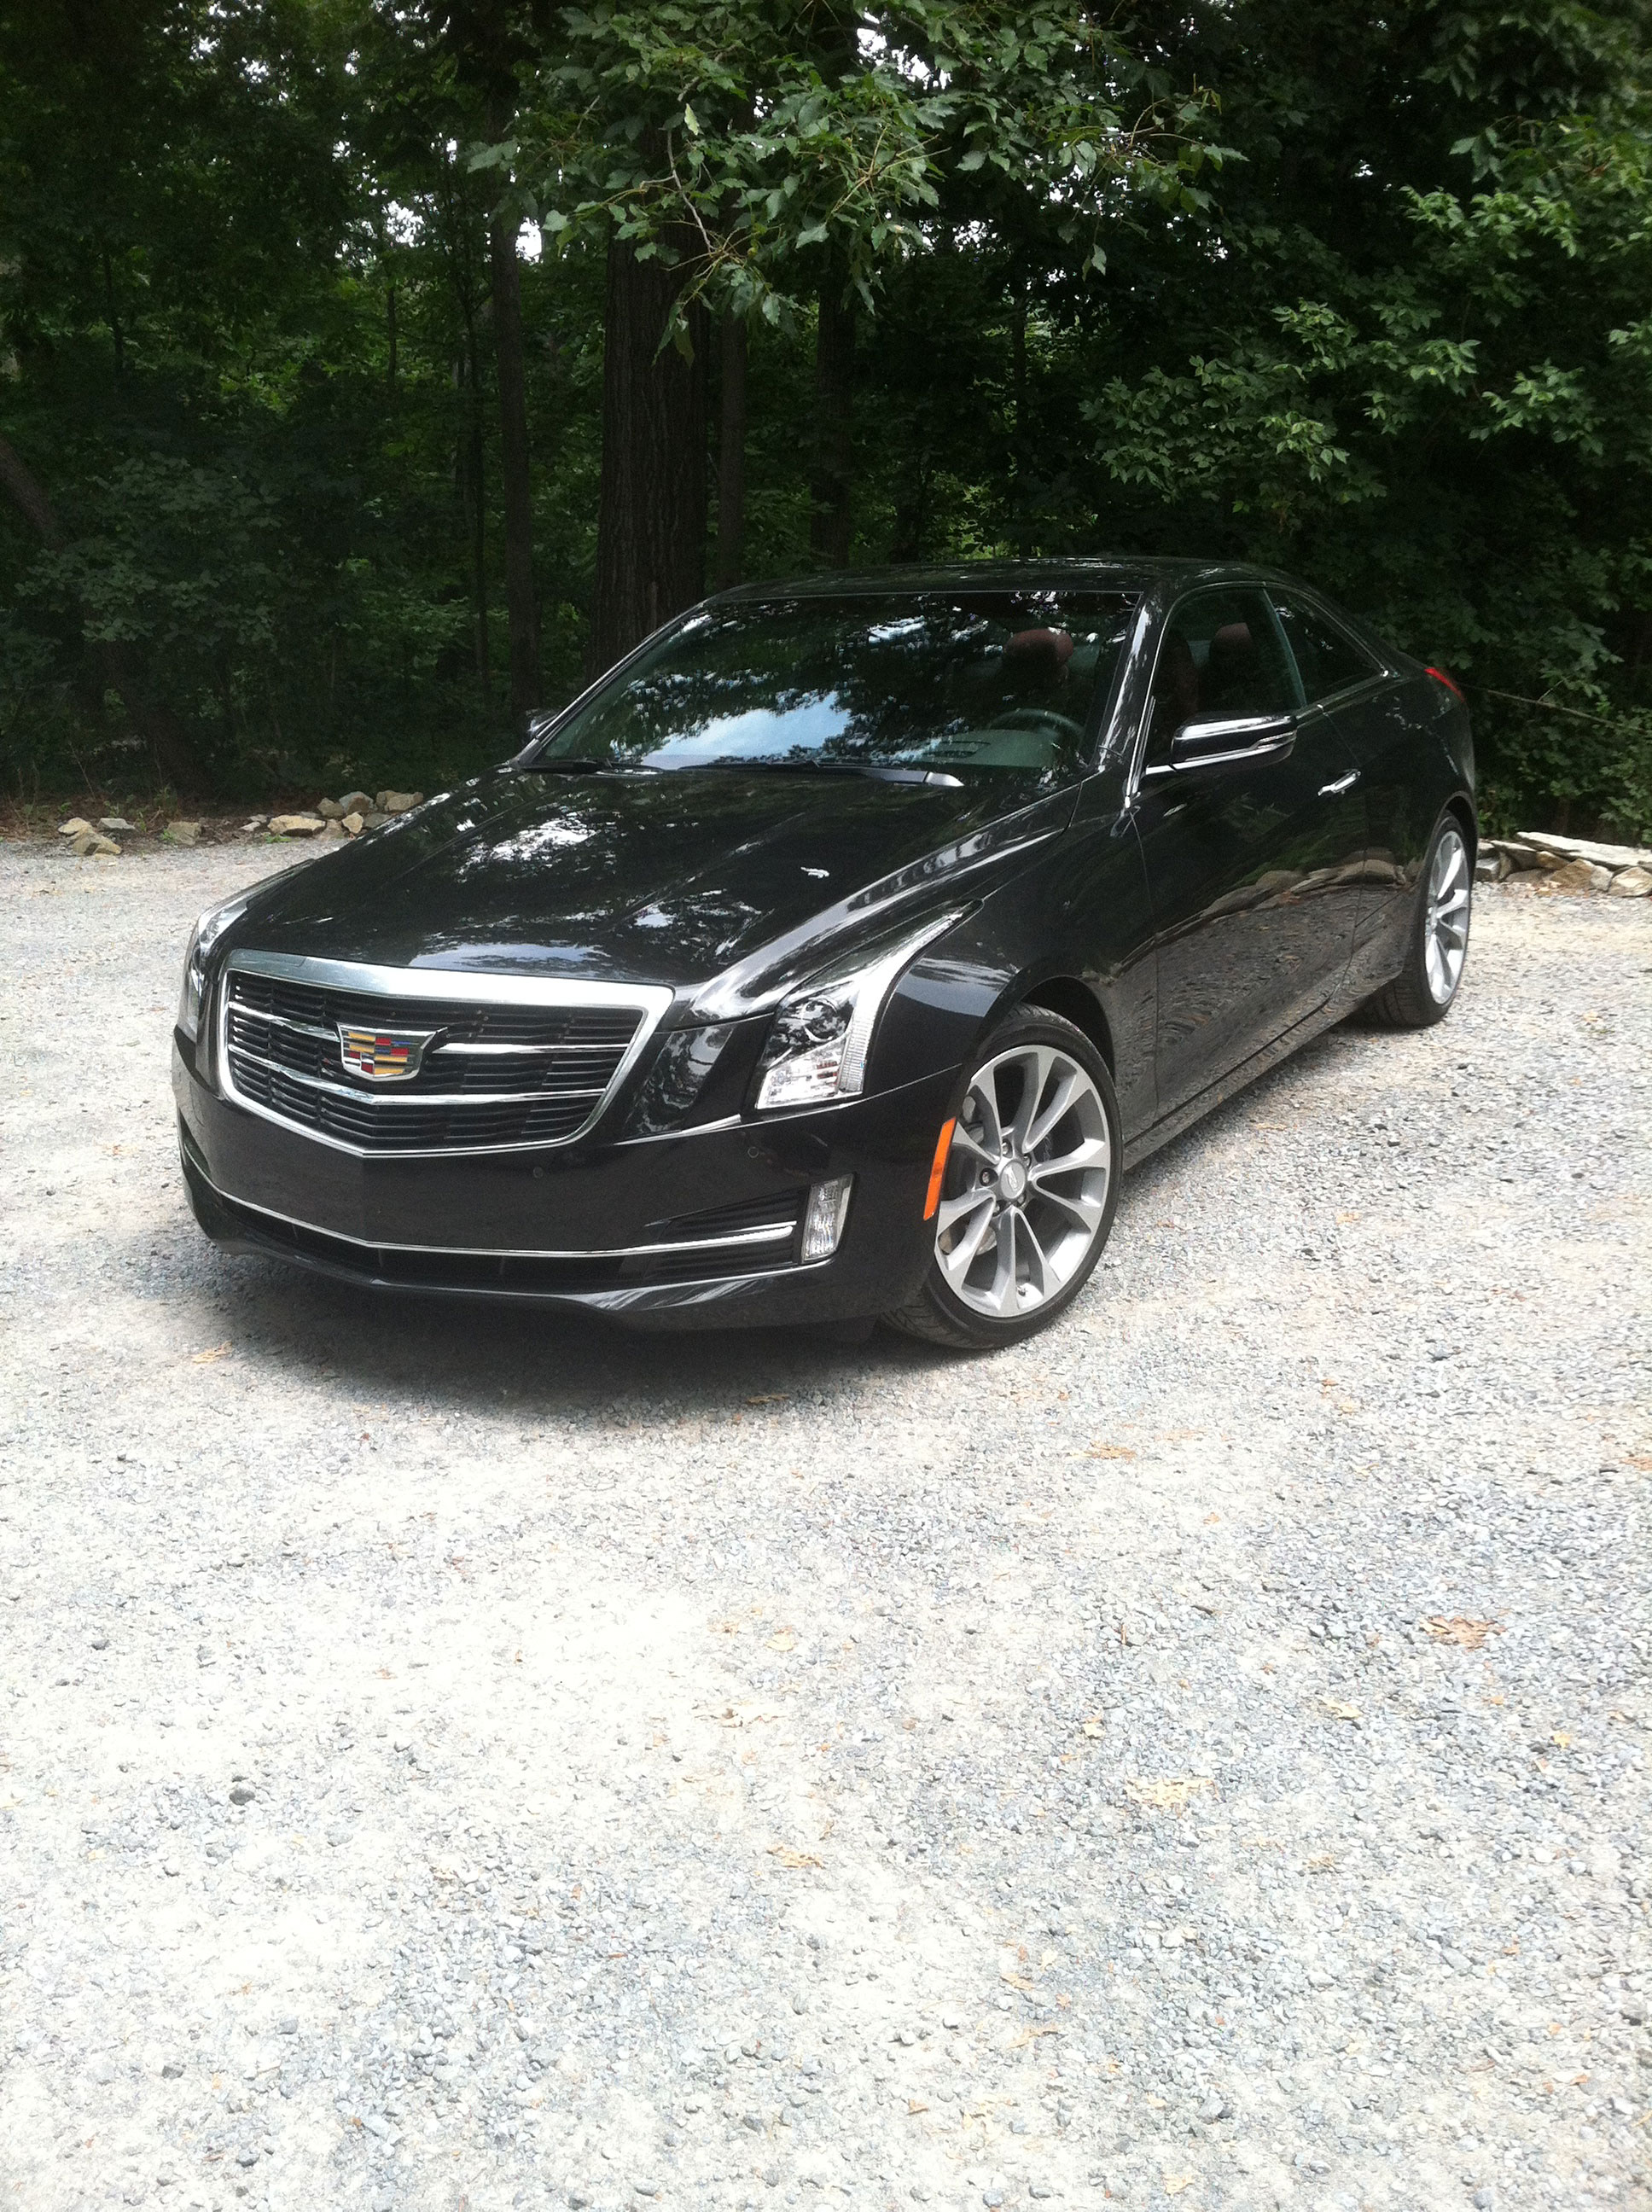 Car Report: Cadillac ATS coupe has style; Ford introduces a new van